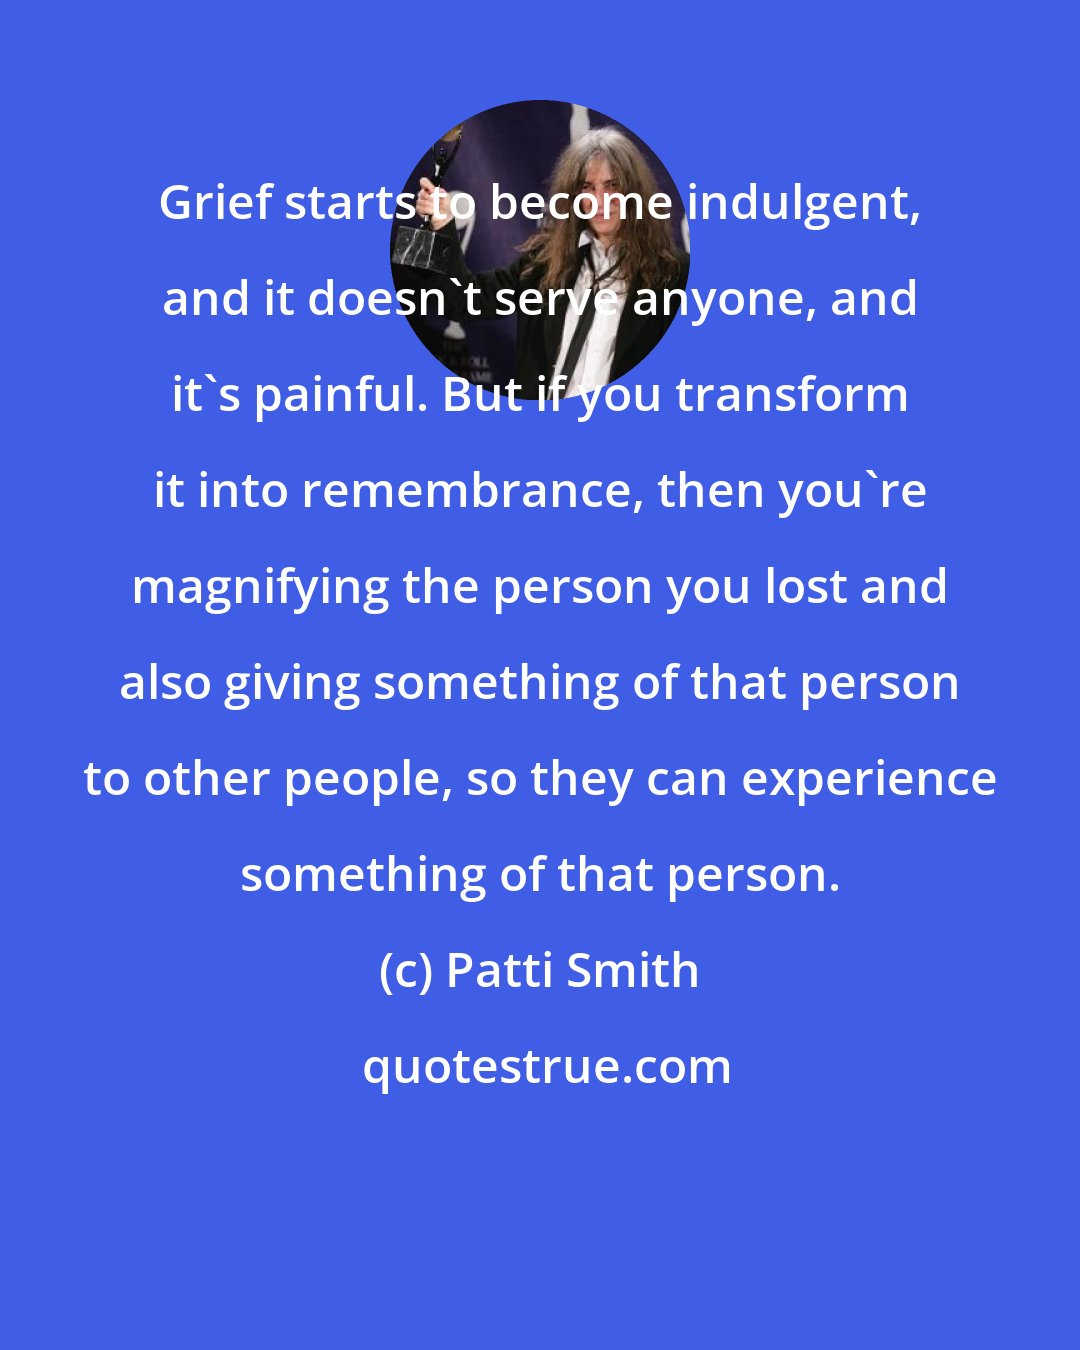 Patti Smith: Grief starts to become indulgent, and it doesn't serve anyone, and it's painful. But if you transform it into remembrance, then you're magnifying the person you lost and also giving something of that person to other people, so they can experience something of that person.